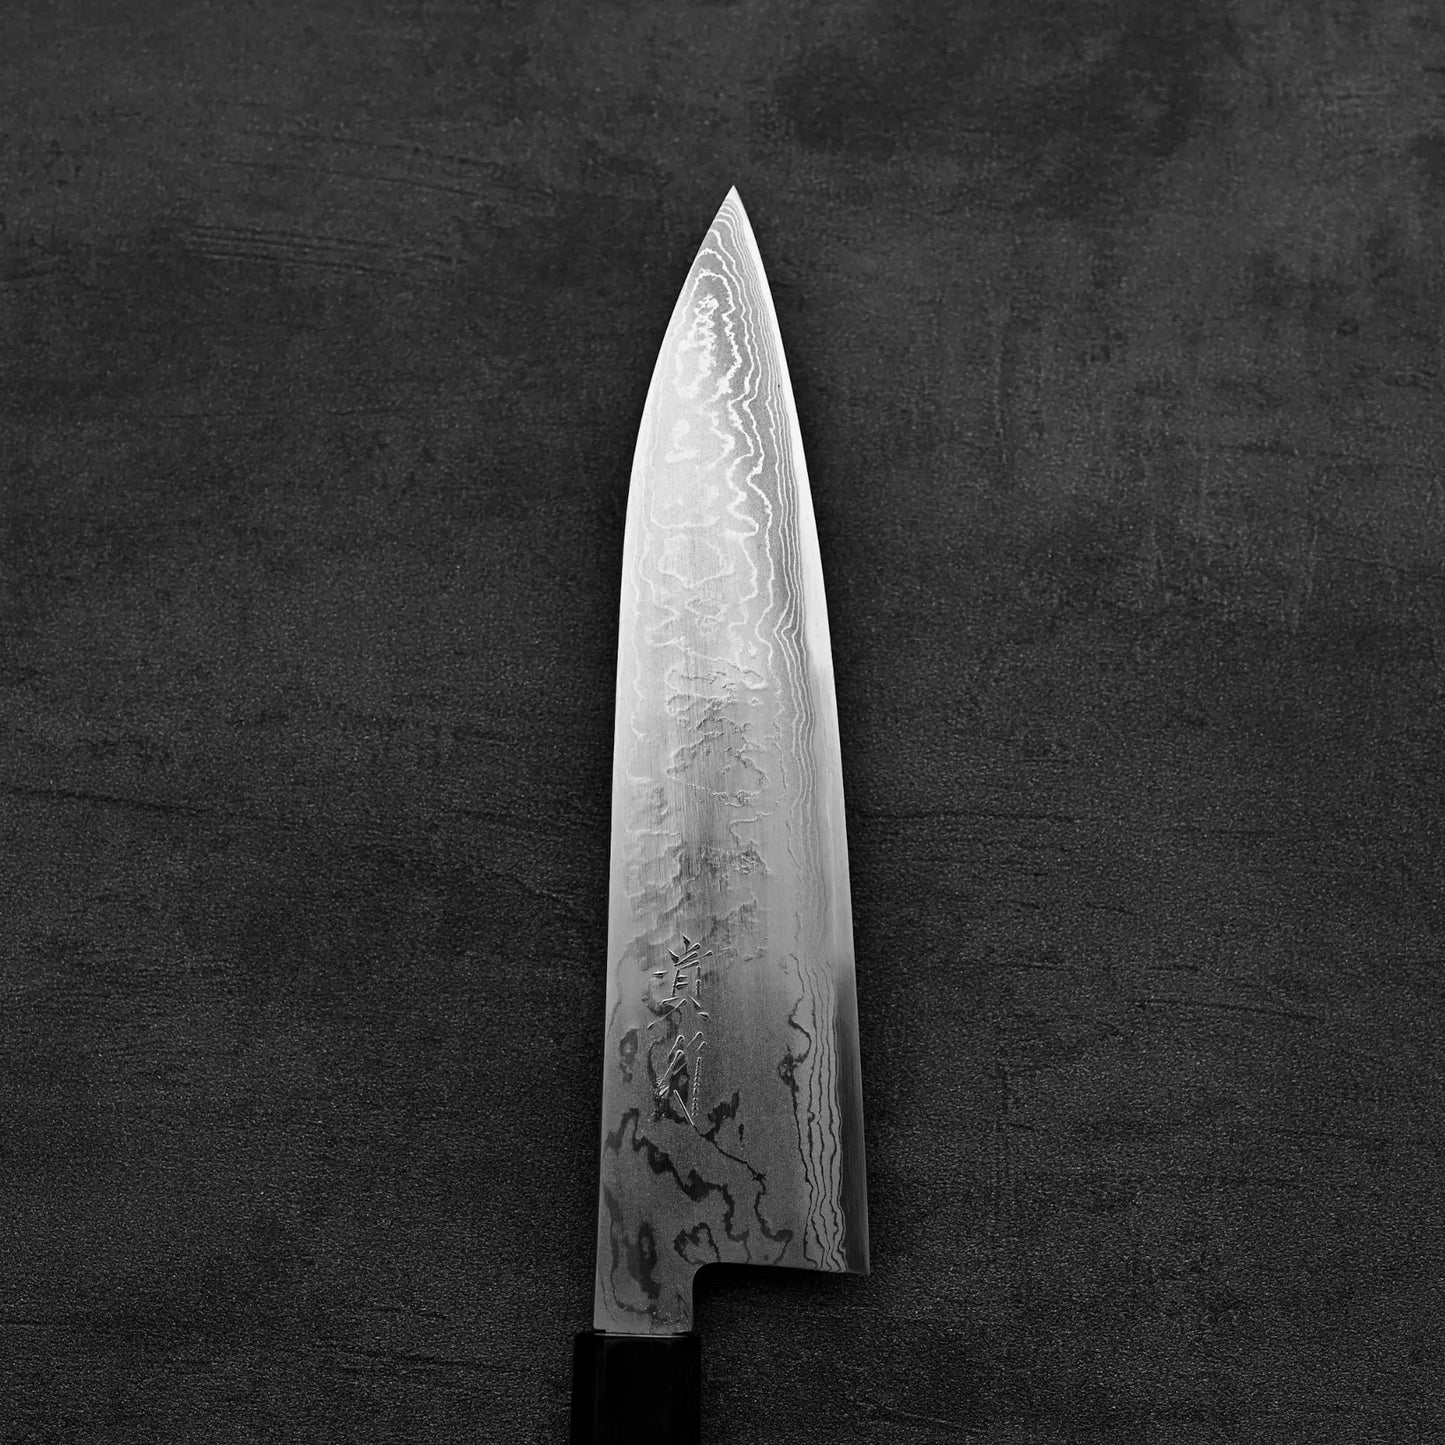 Close up view of the blade of Takayuki Iwai aogami#2 damascus 210mm gyuto knife showing the front side